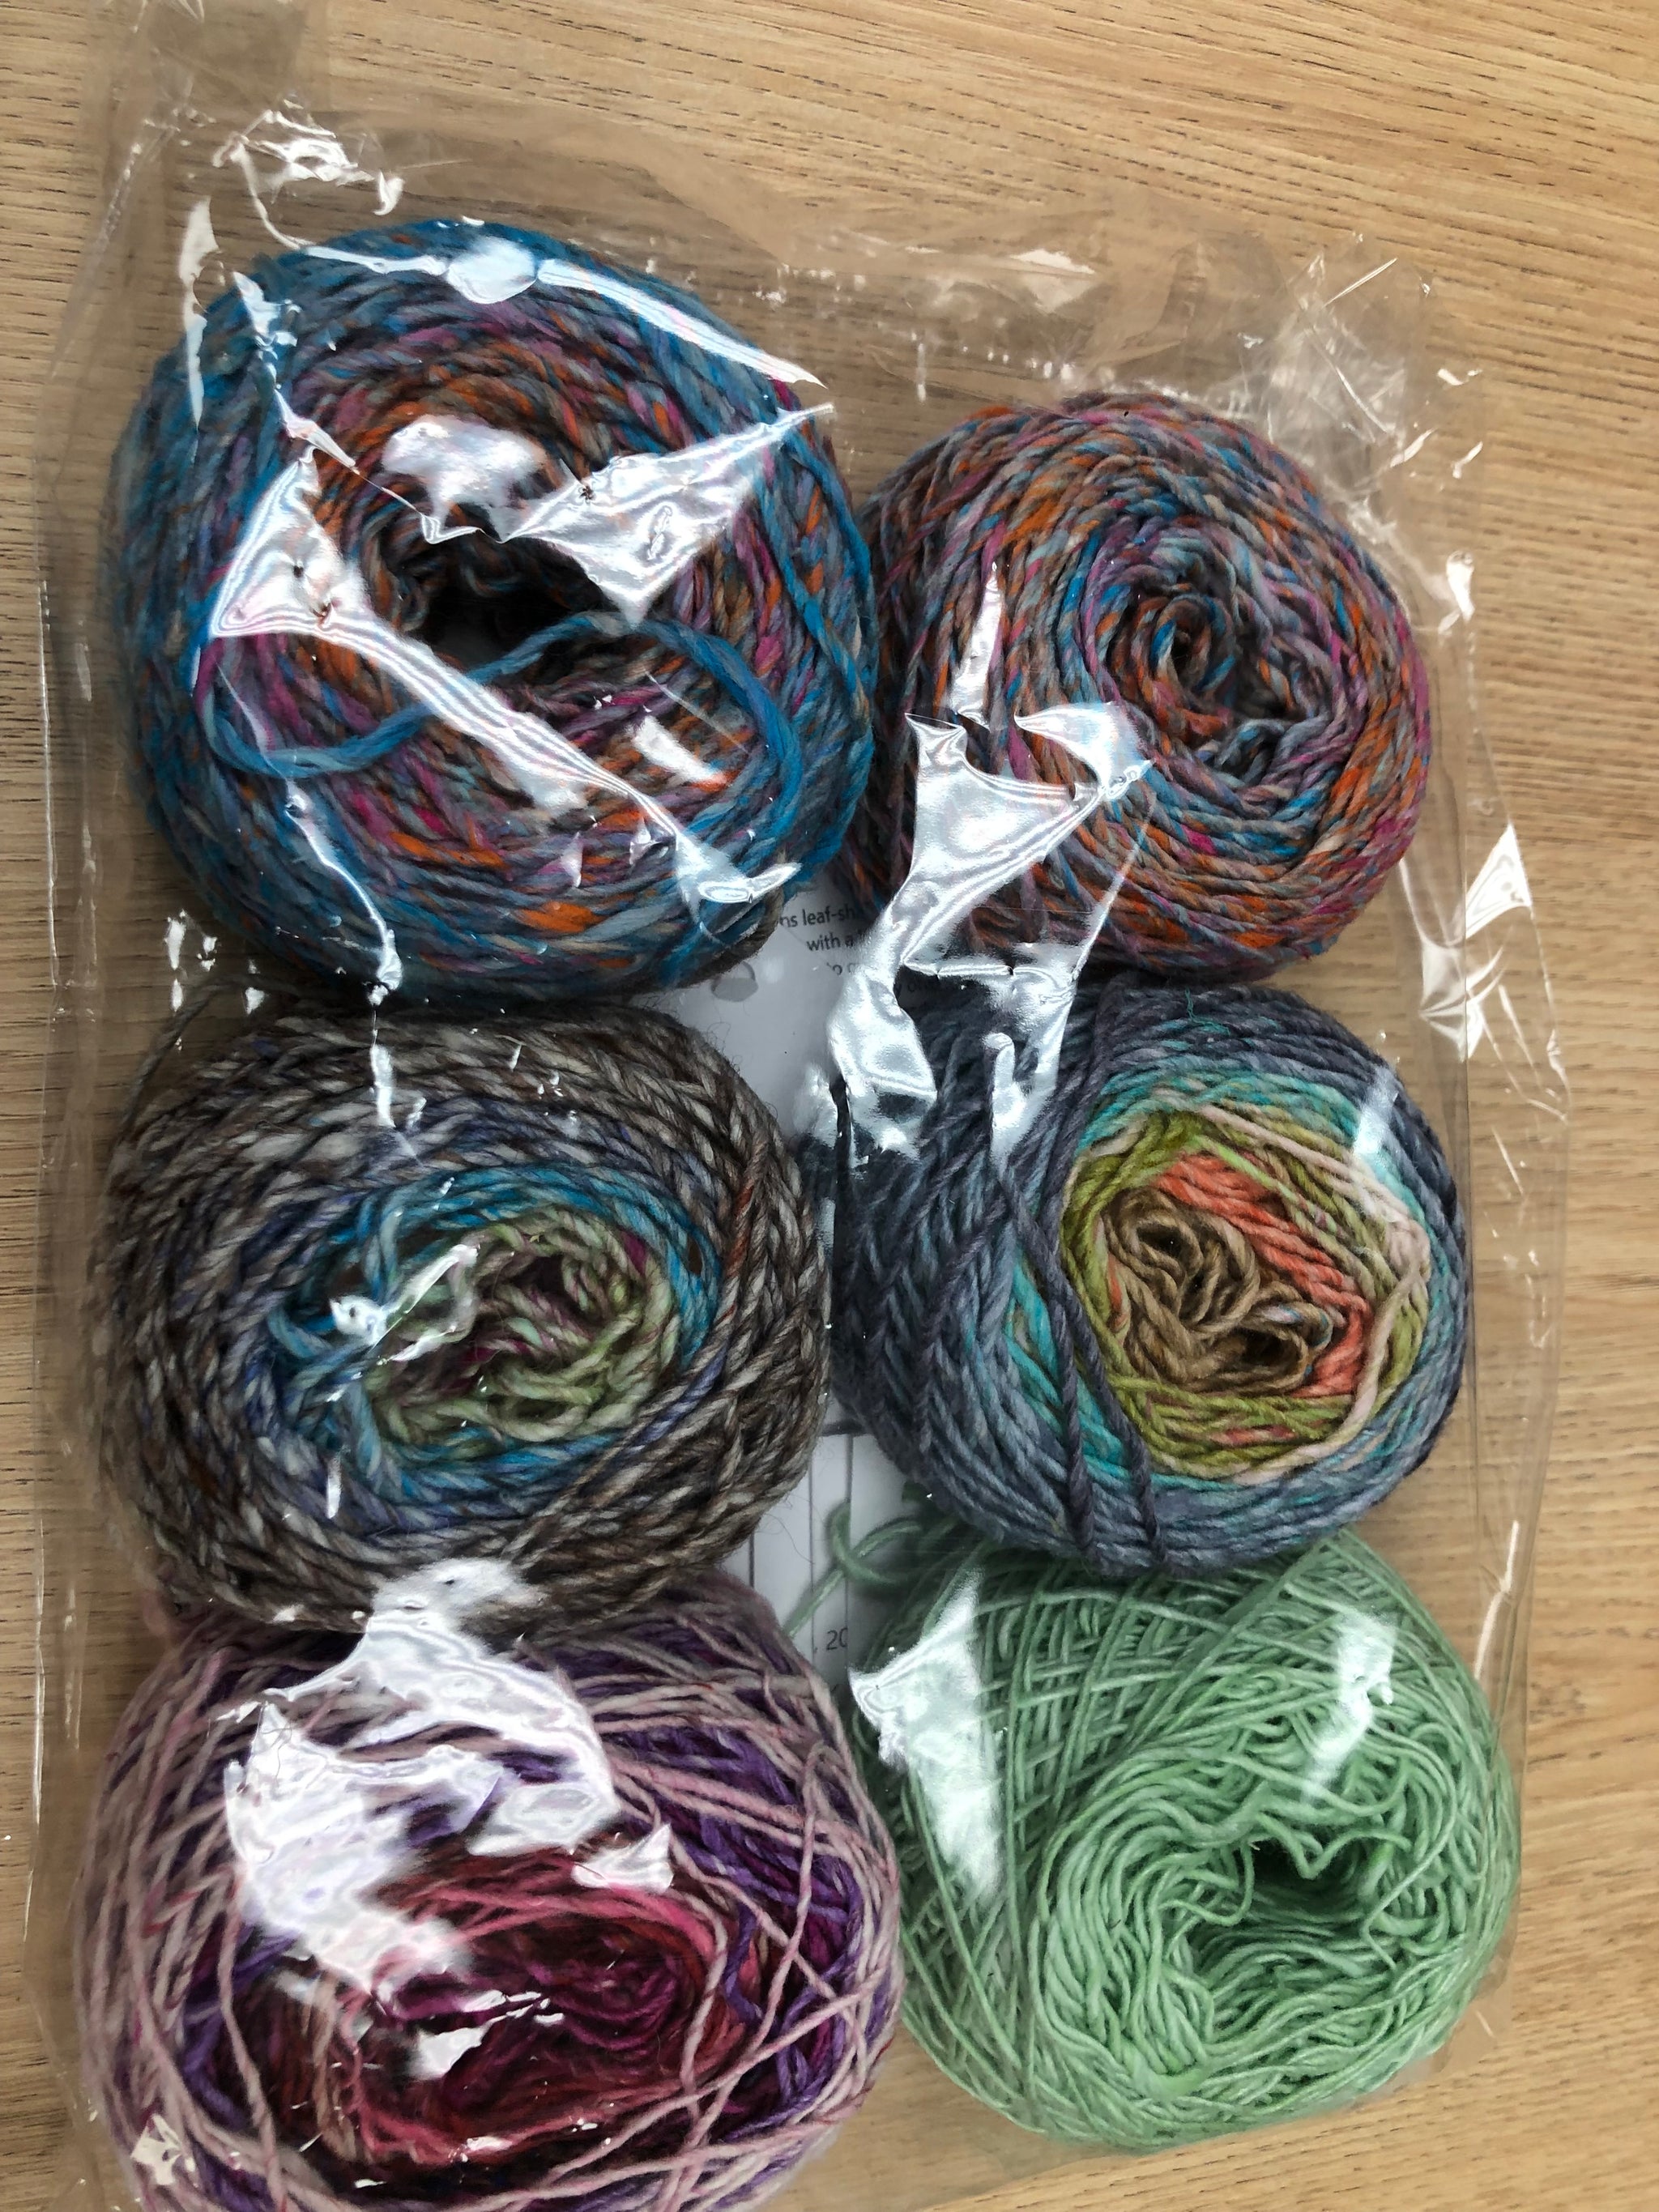 TIDEWATER WRAP - LIMITED EXCLUSIVE NORO YARN SAMPLER WRAP KIT